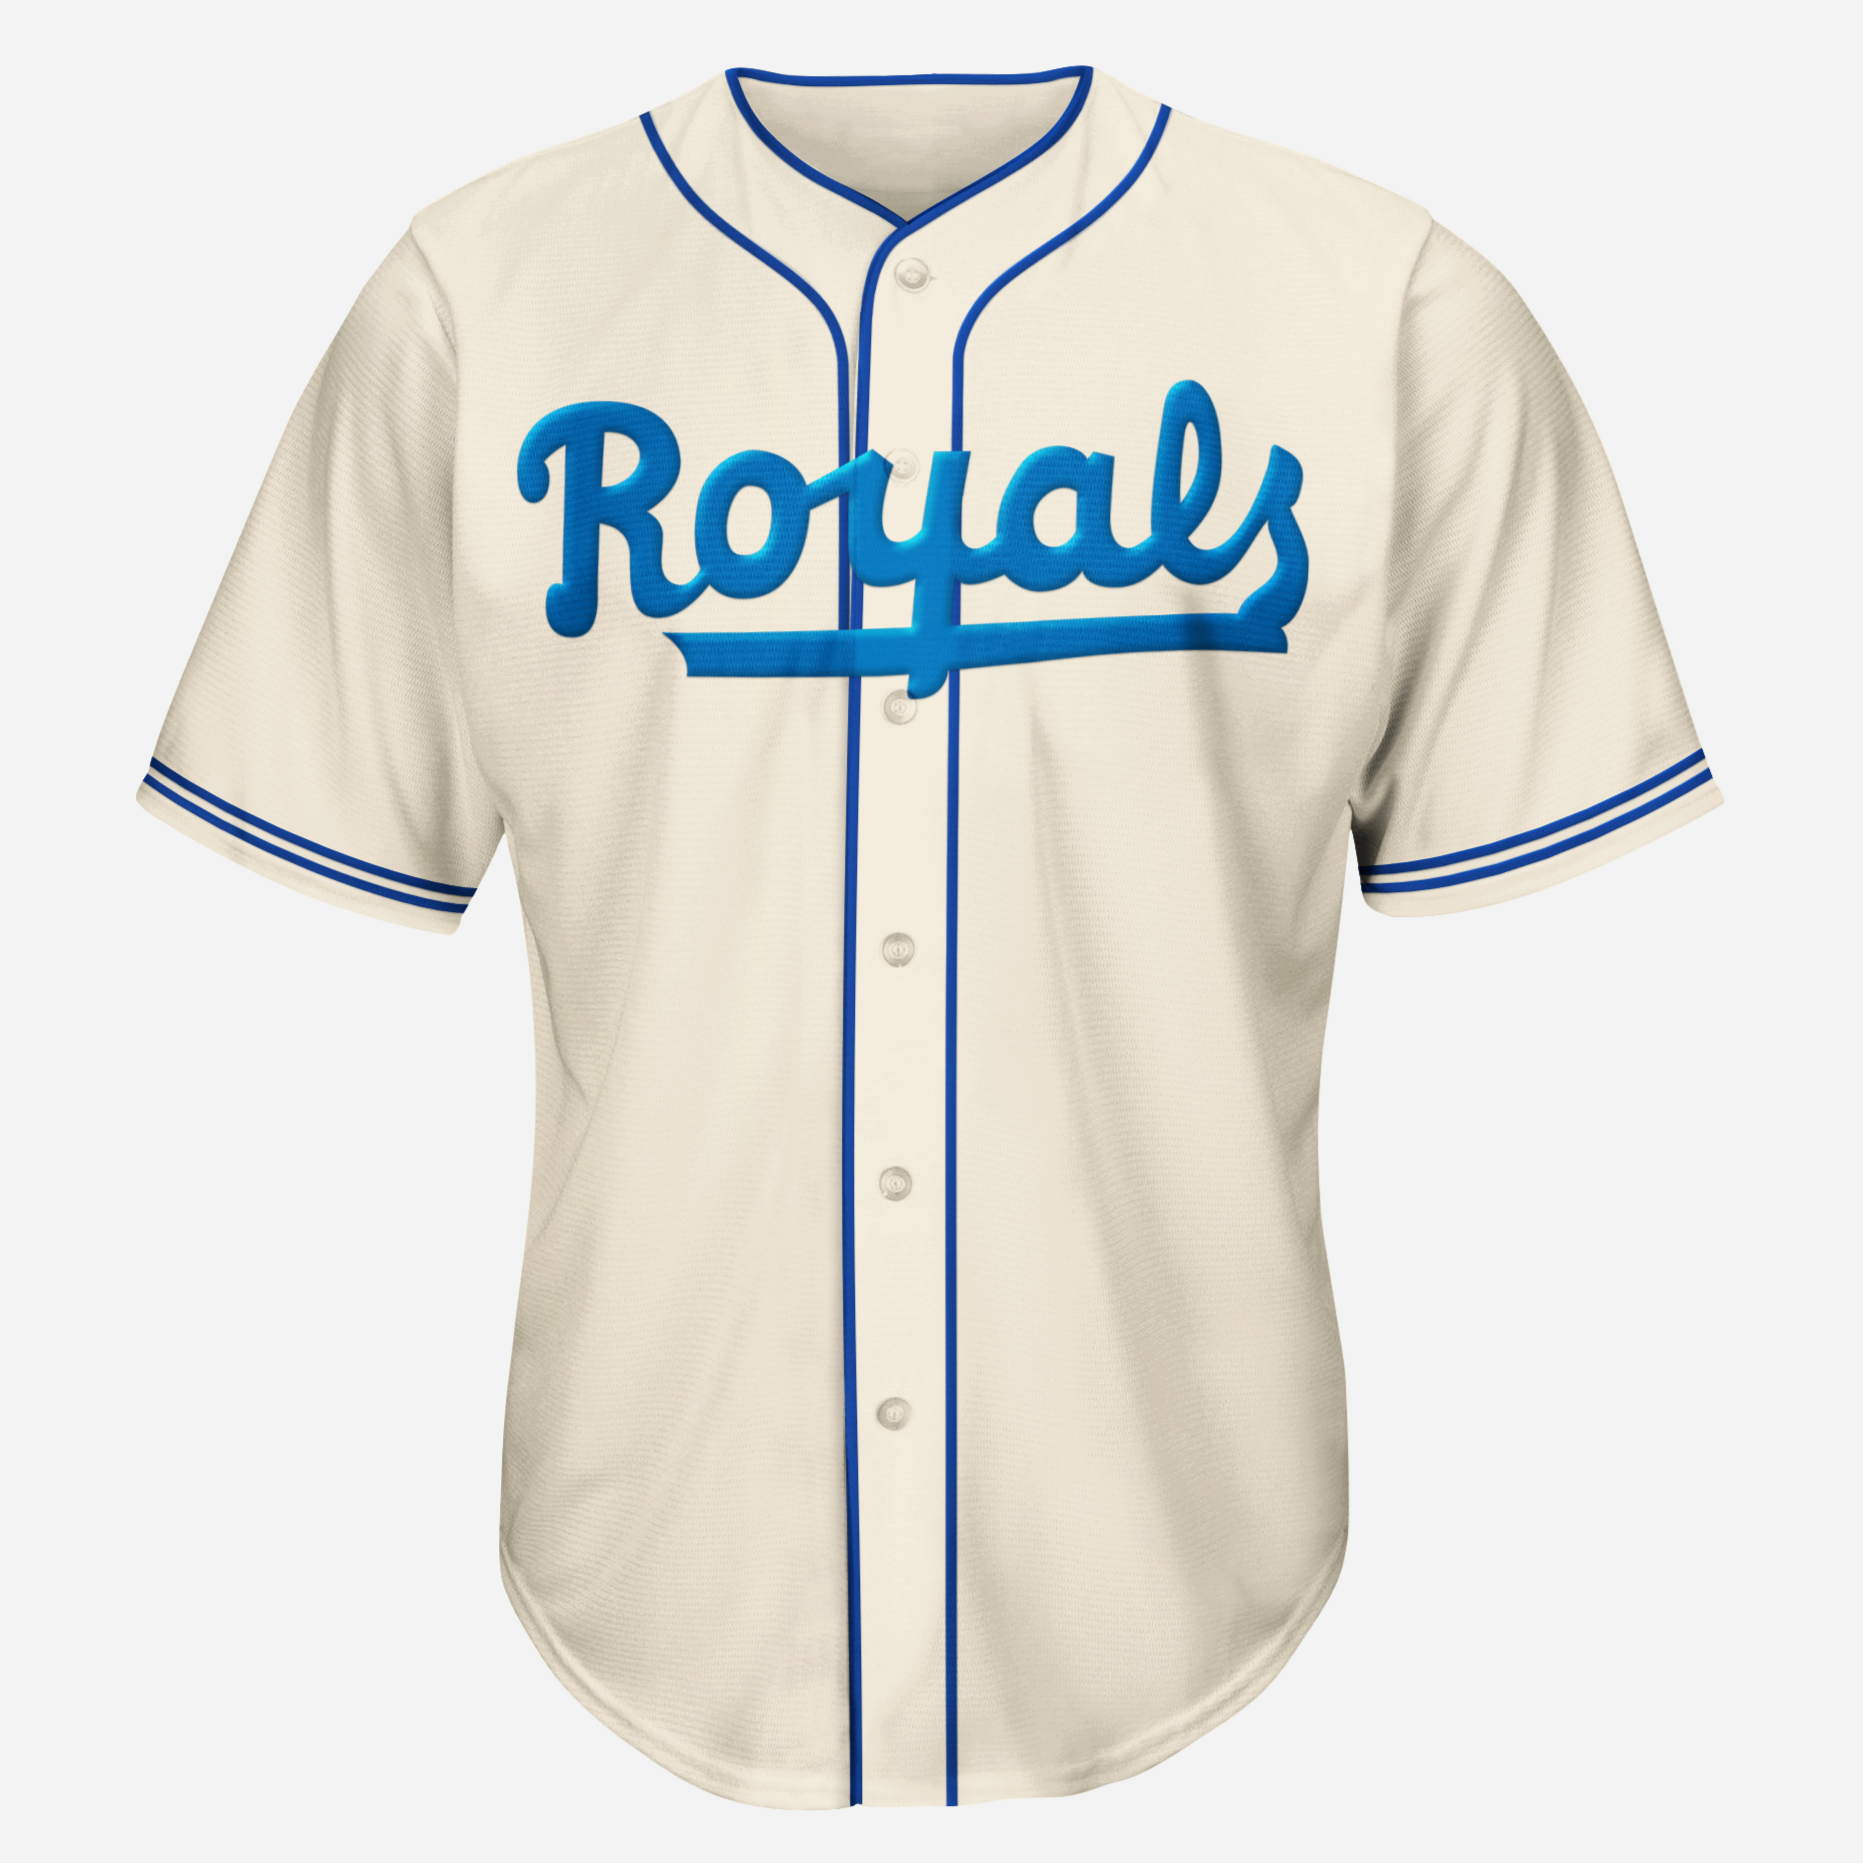 royals white jersey